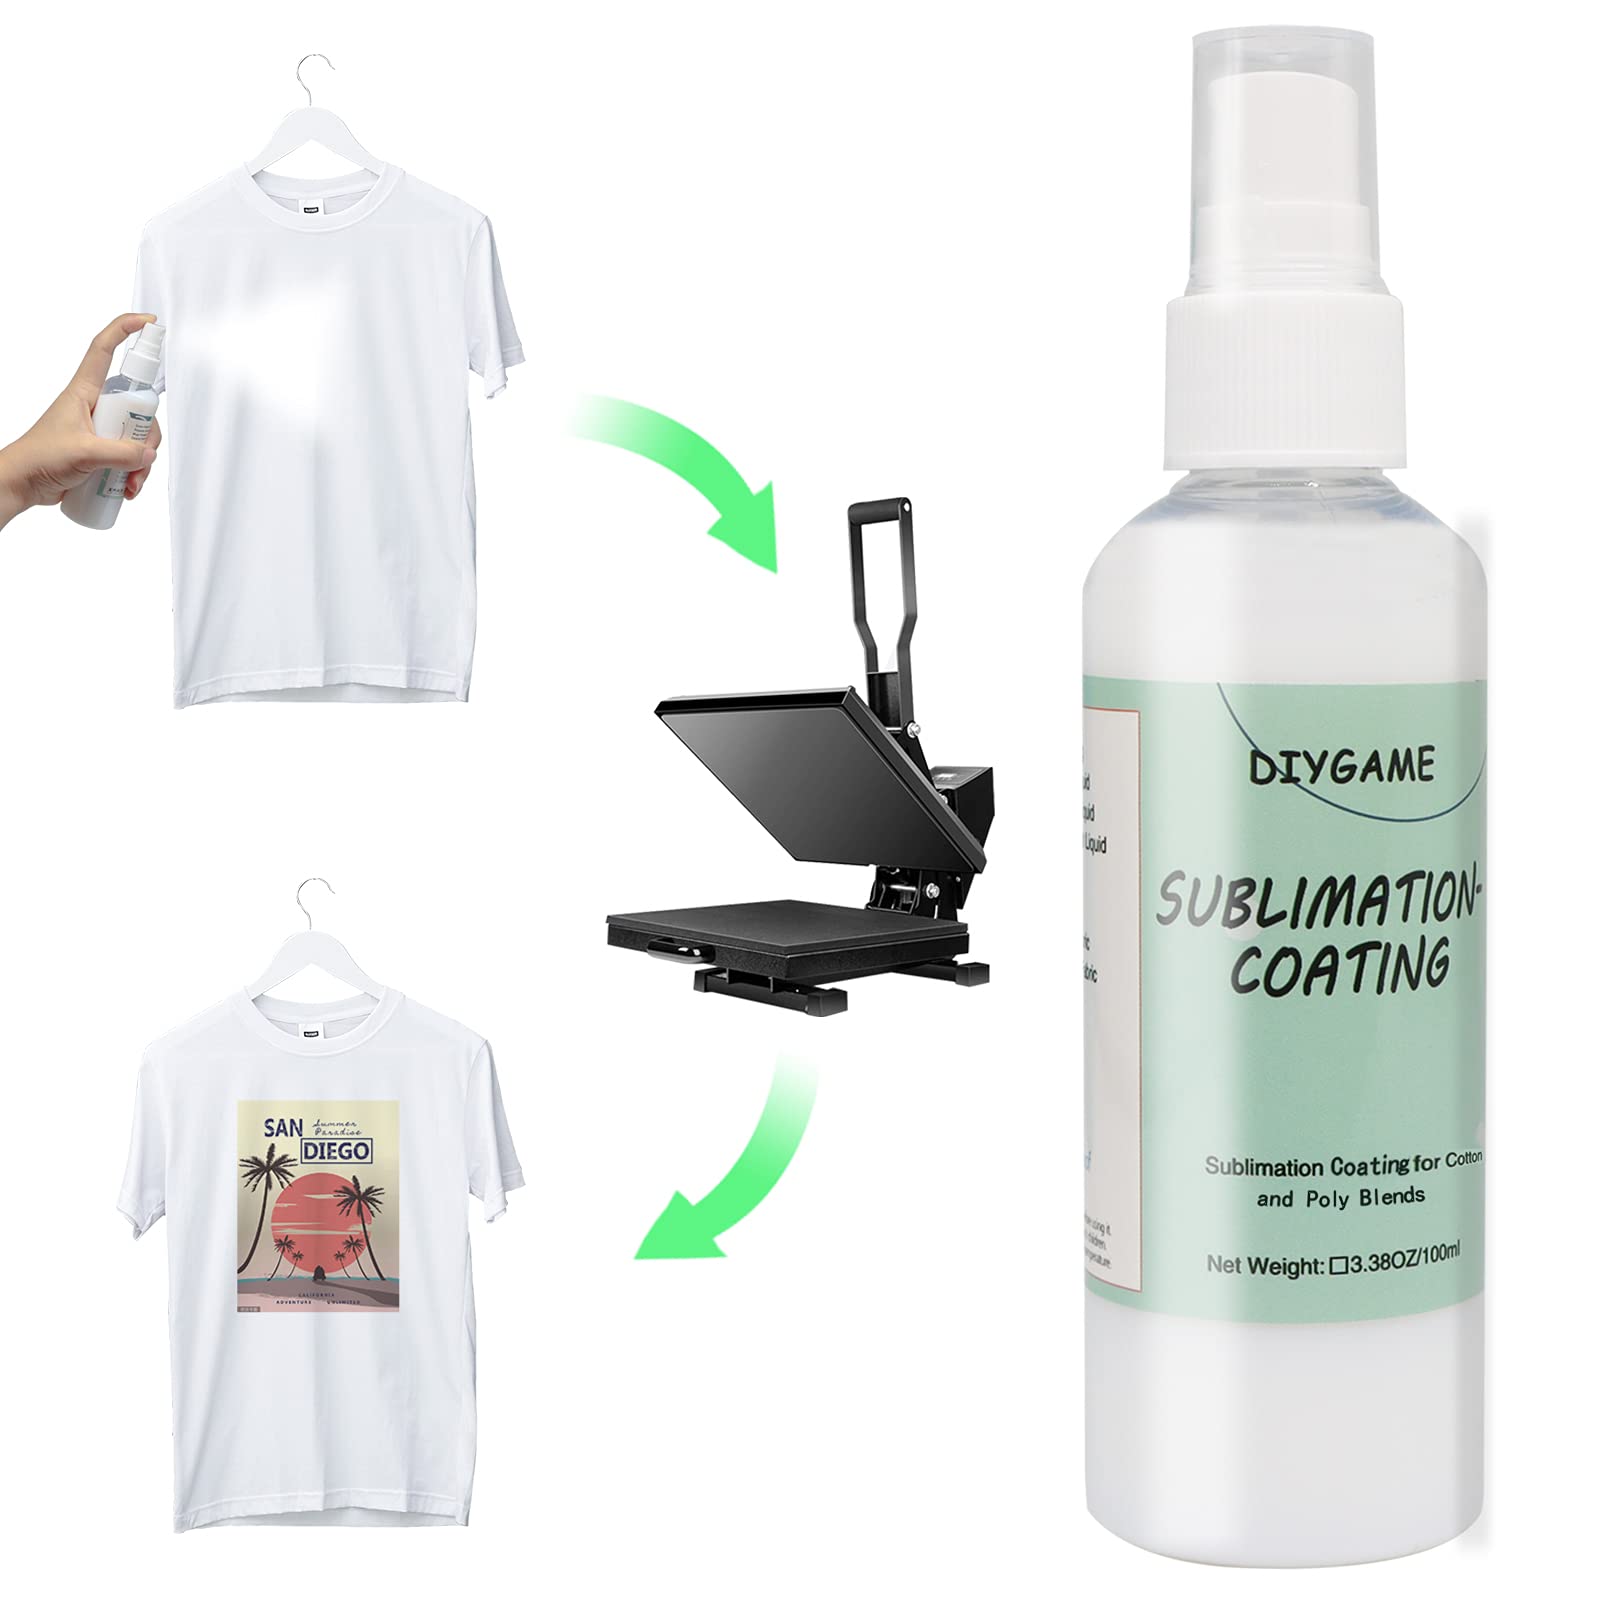 New Sublimation Coating Spray for Cotton T-SHIRTS & polyester 3.38 oz